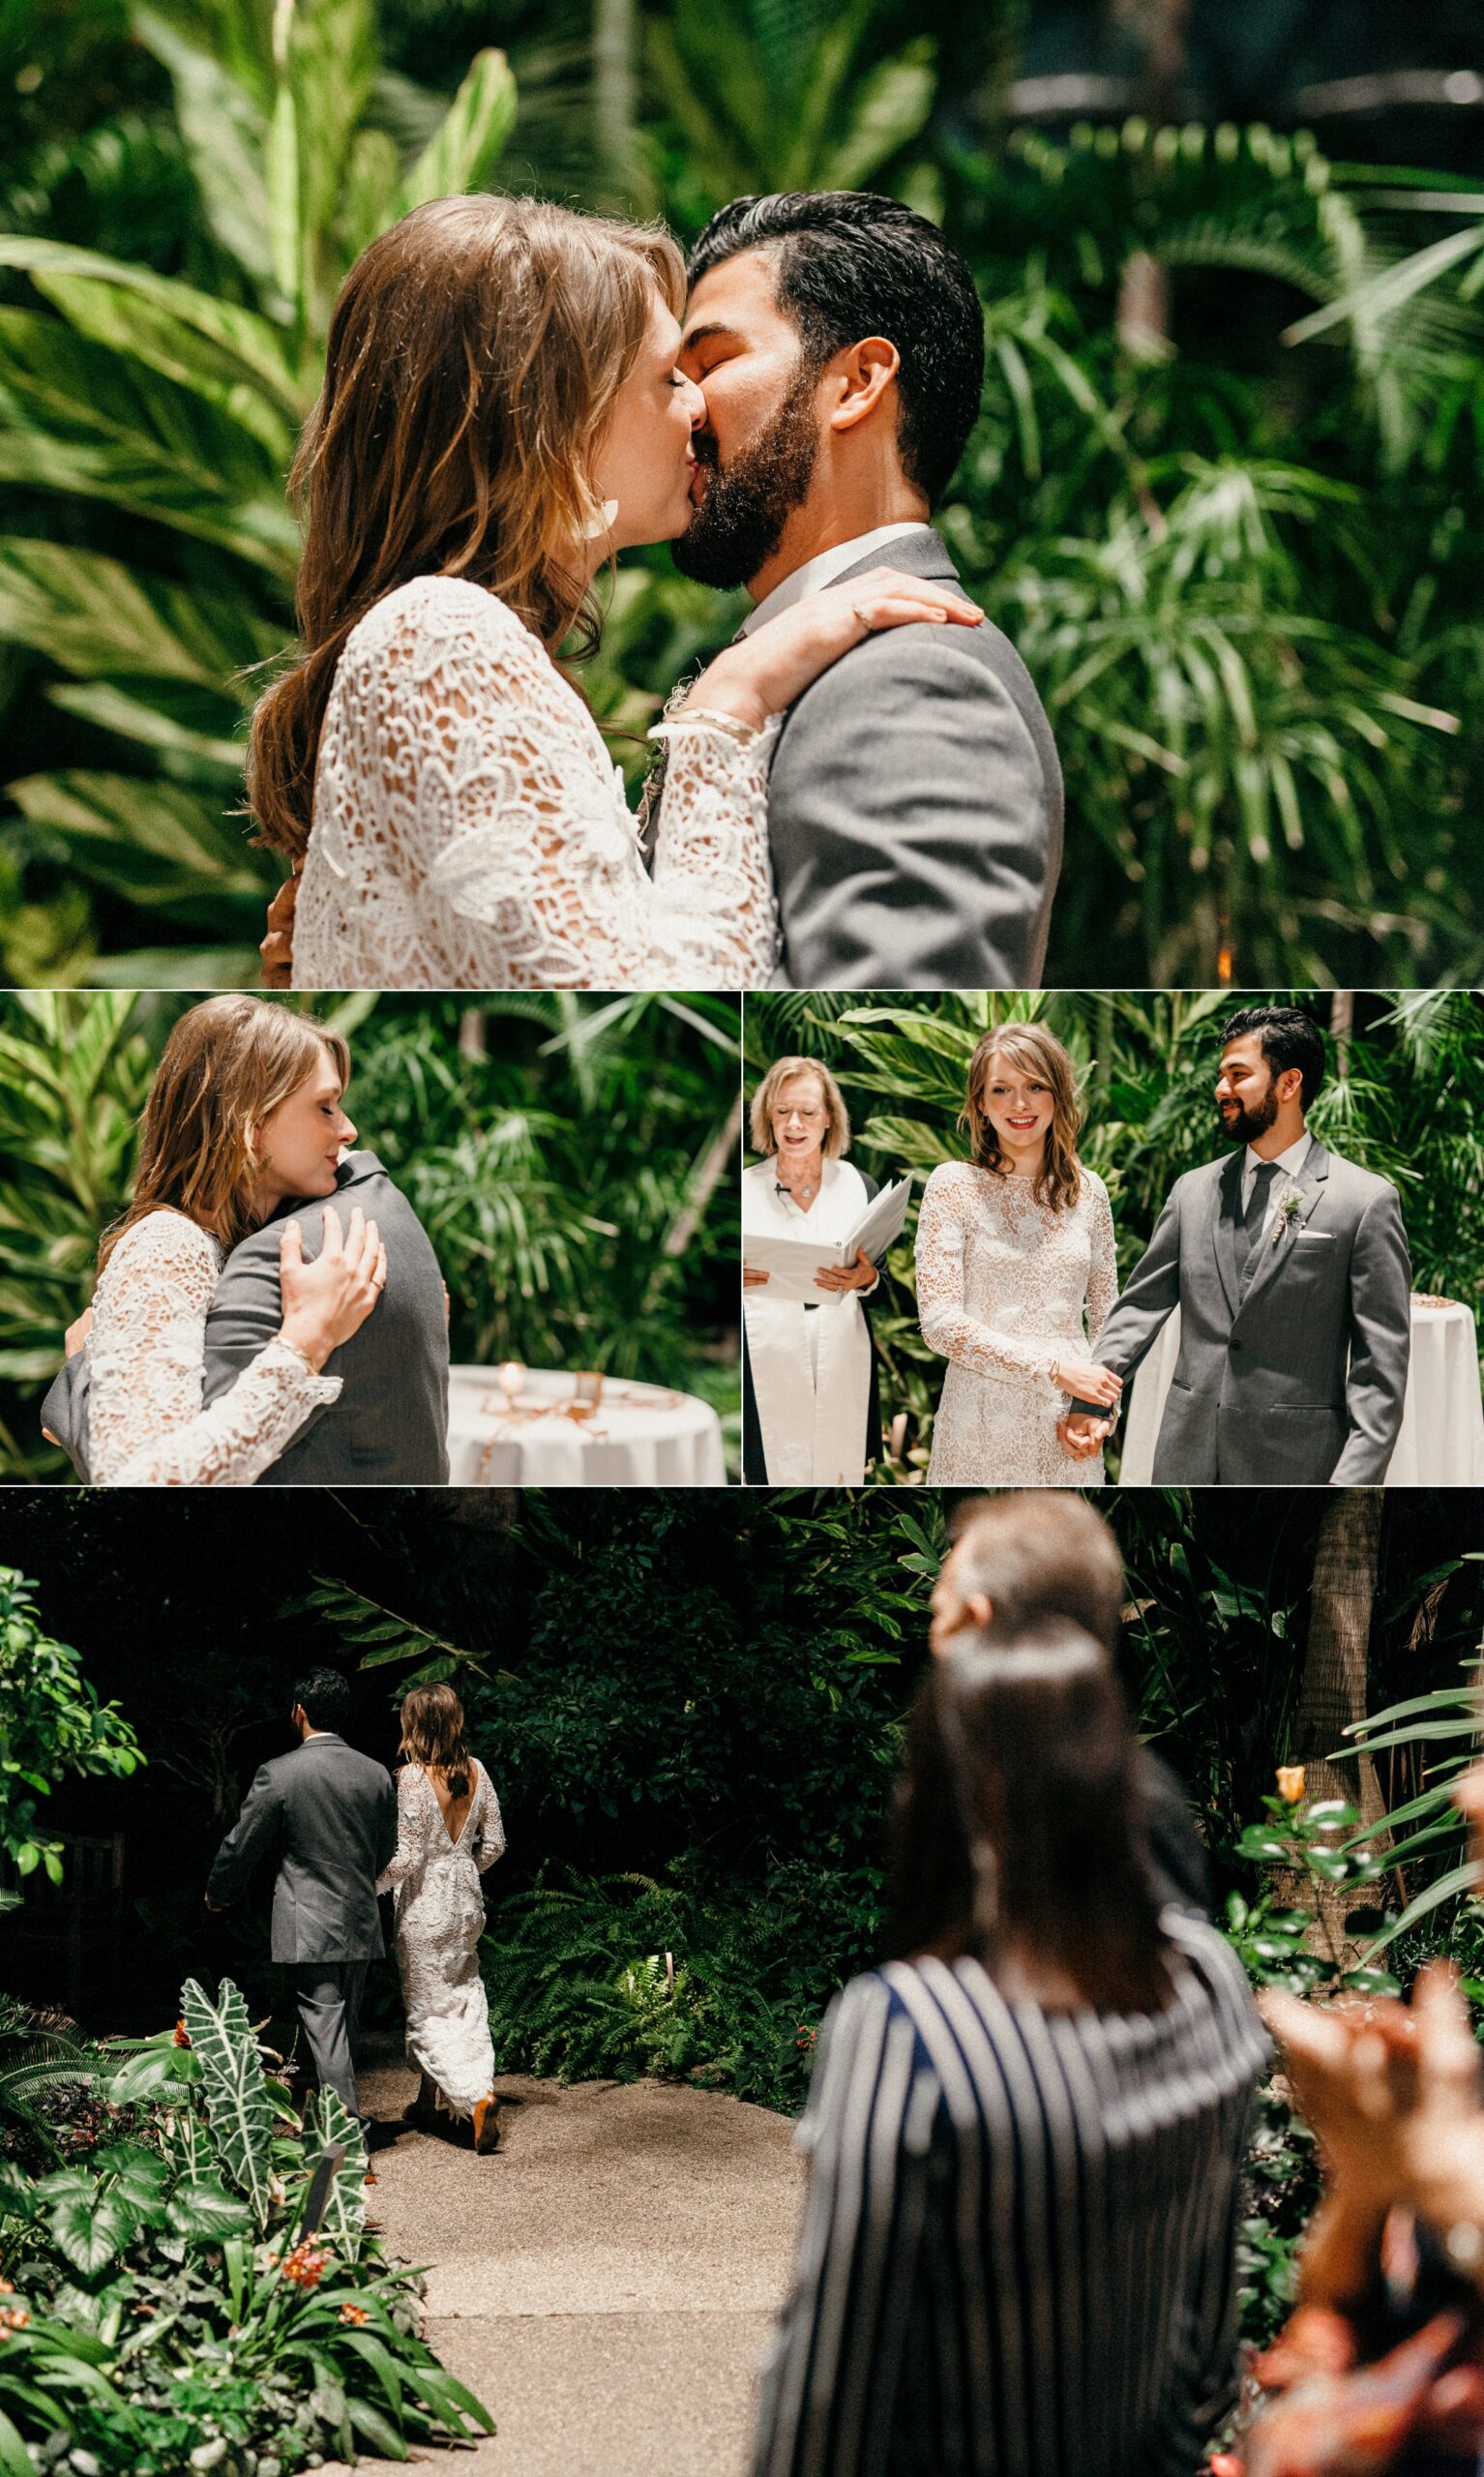 Small Intimate Floral Wedding with a Simple Delicate Gown in Des Moines, IA Botanical Garden